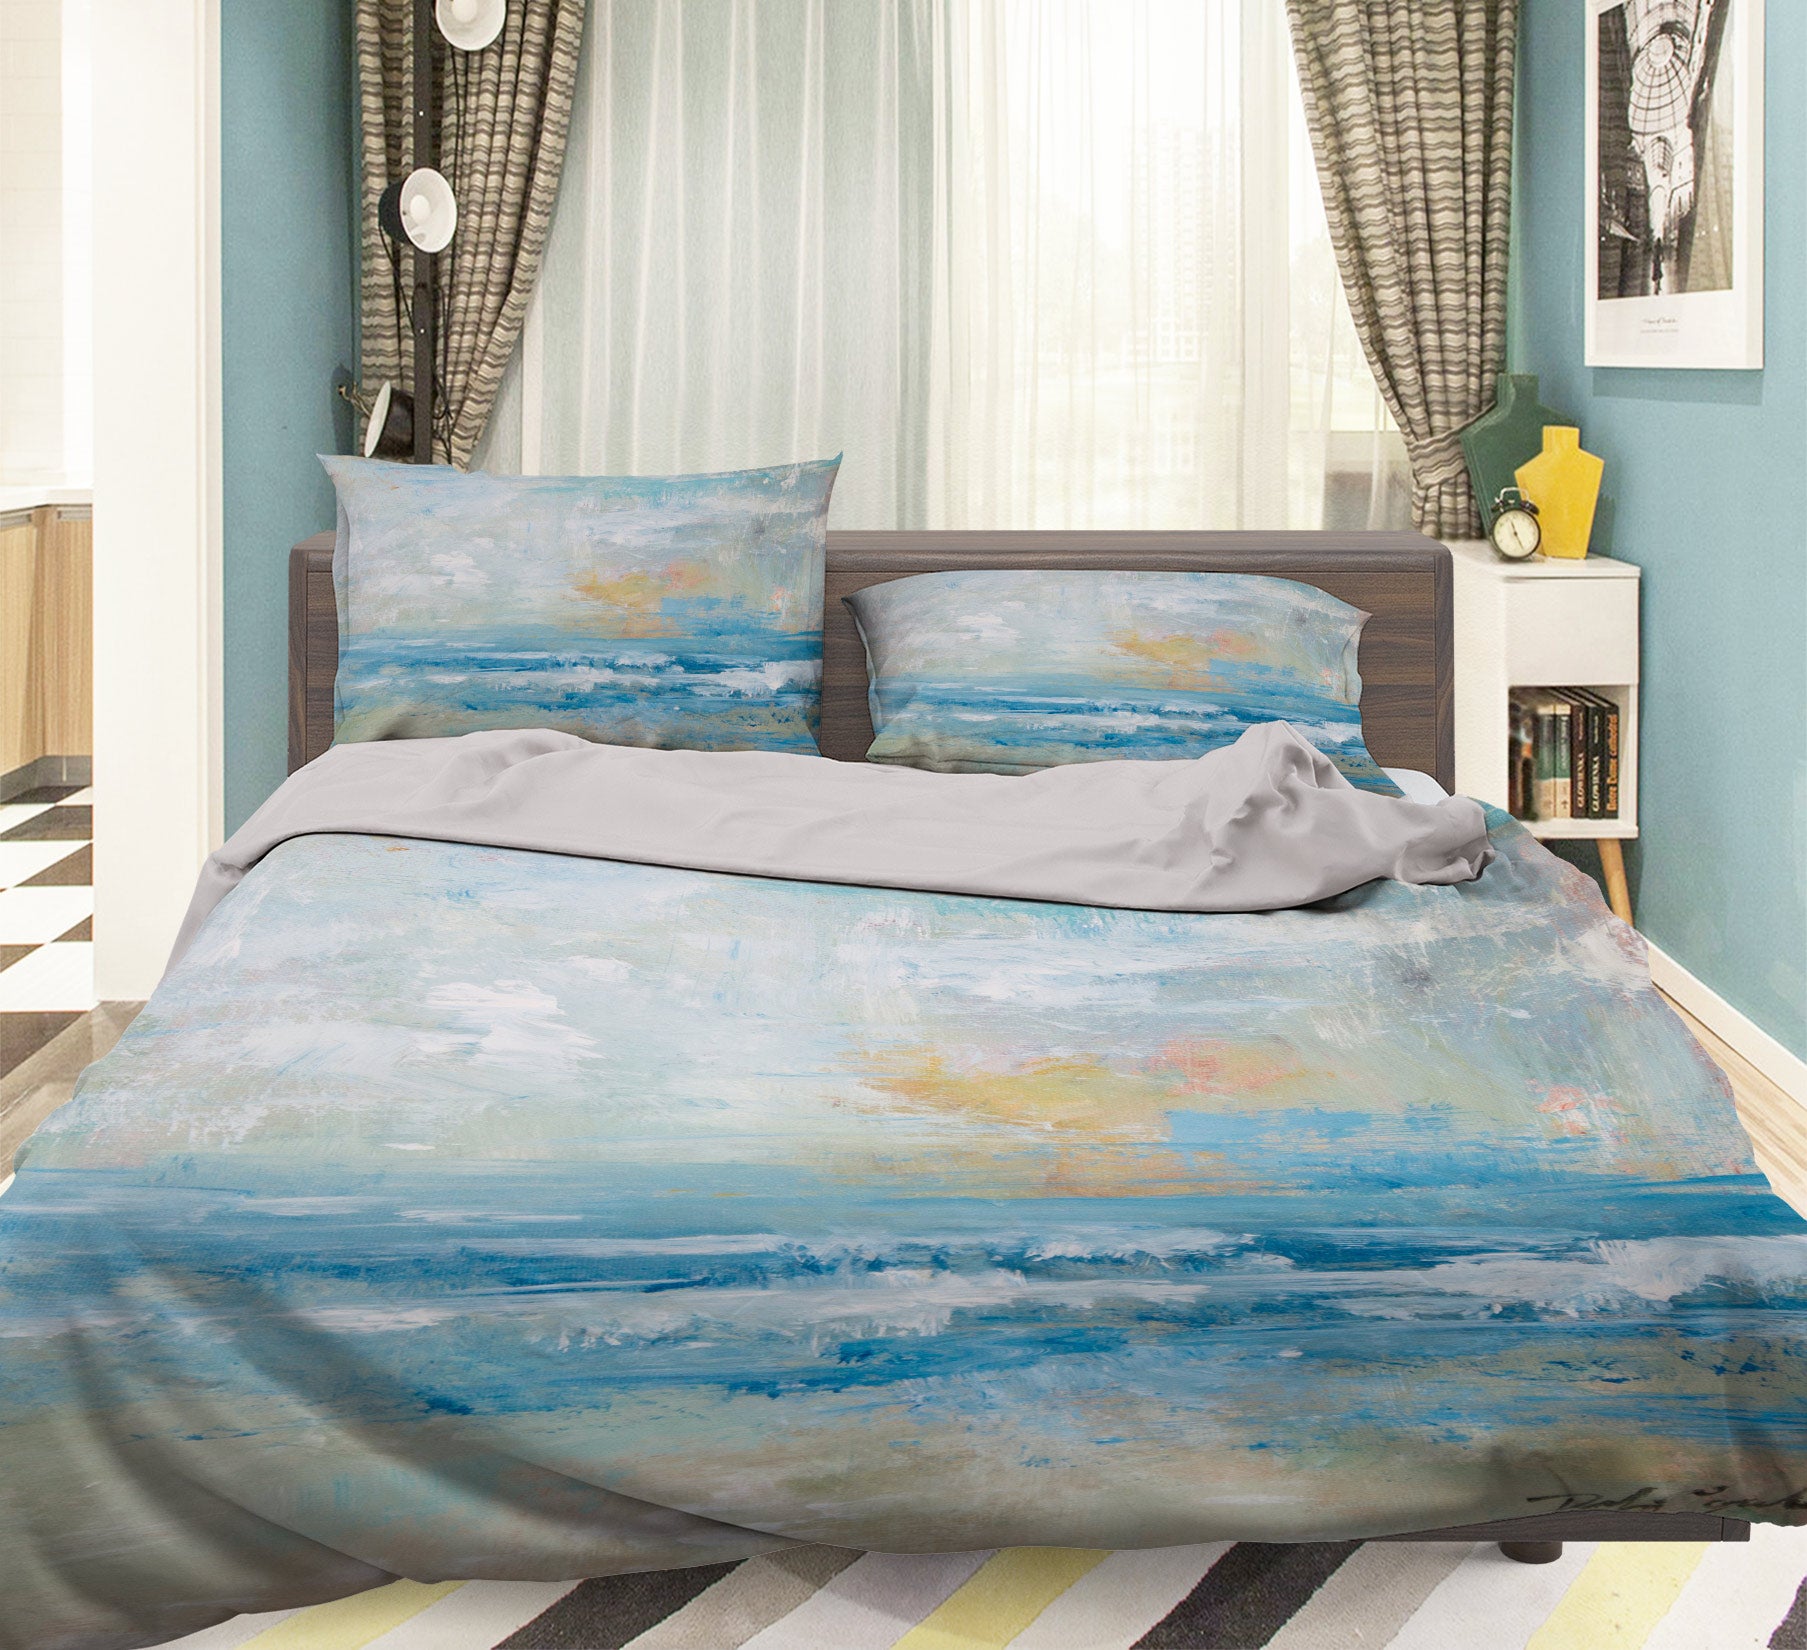 3D Seaside 2138 Debi Coules Bedding Bed Pillowcases Quilt